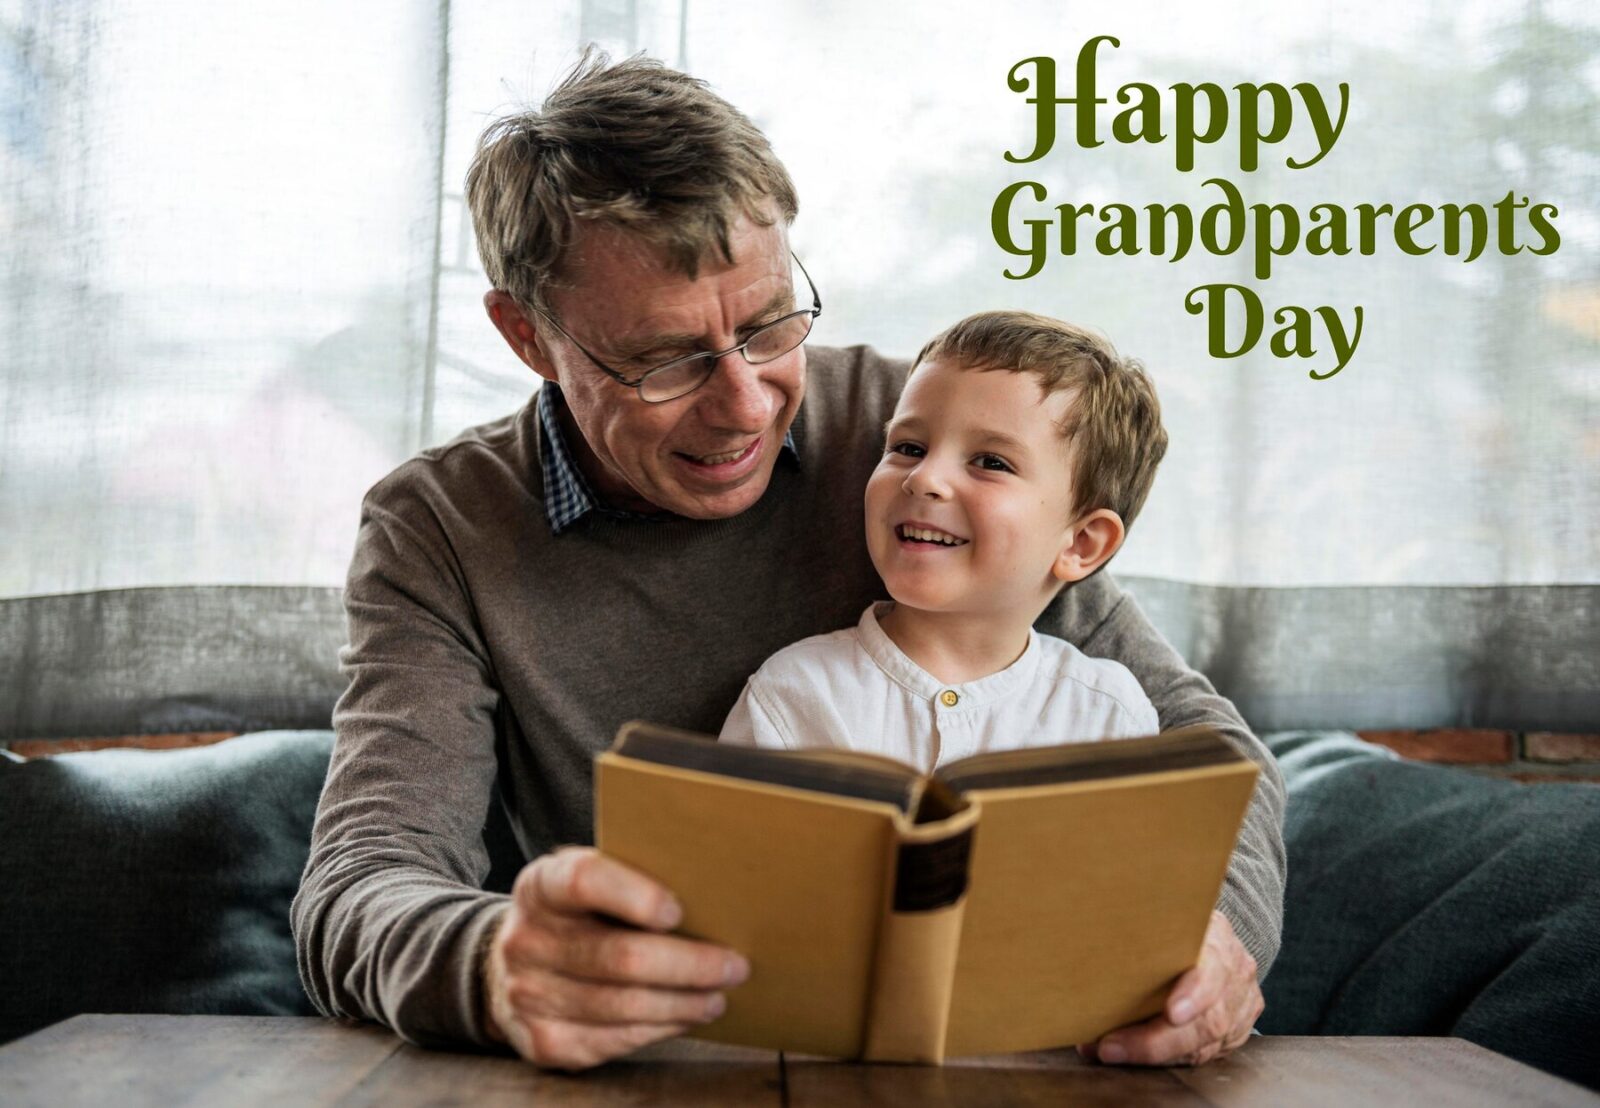 grandparents day gift ideas homemade